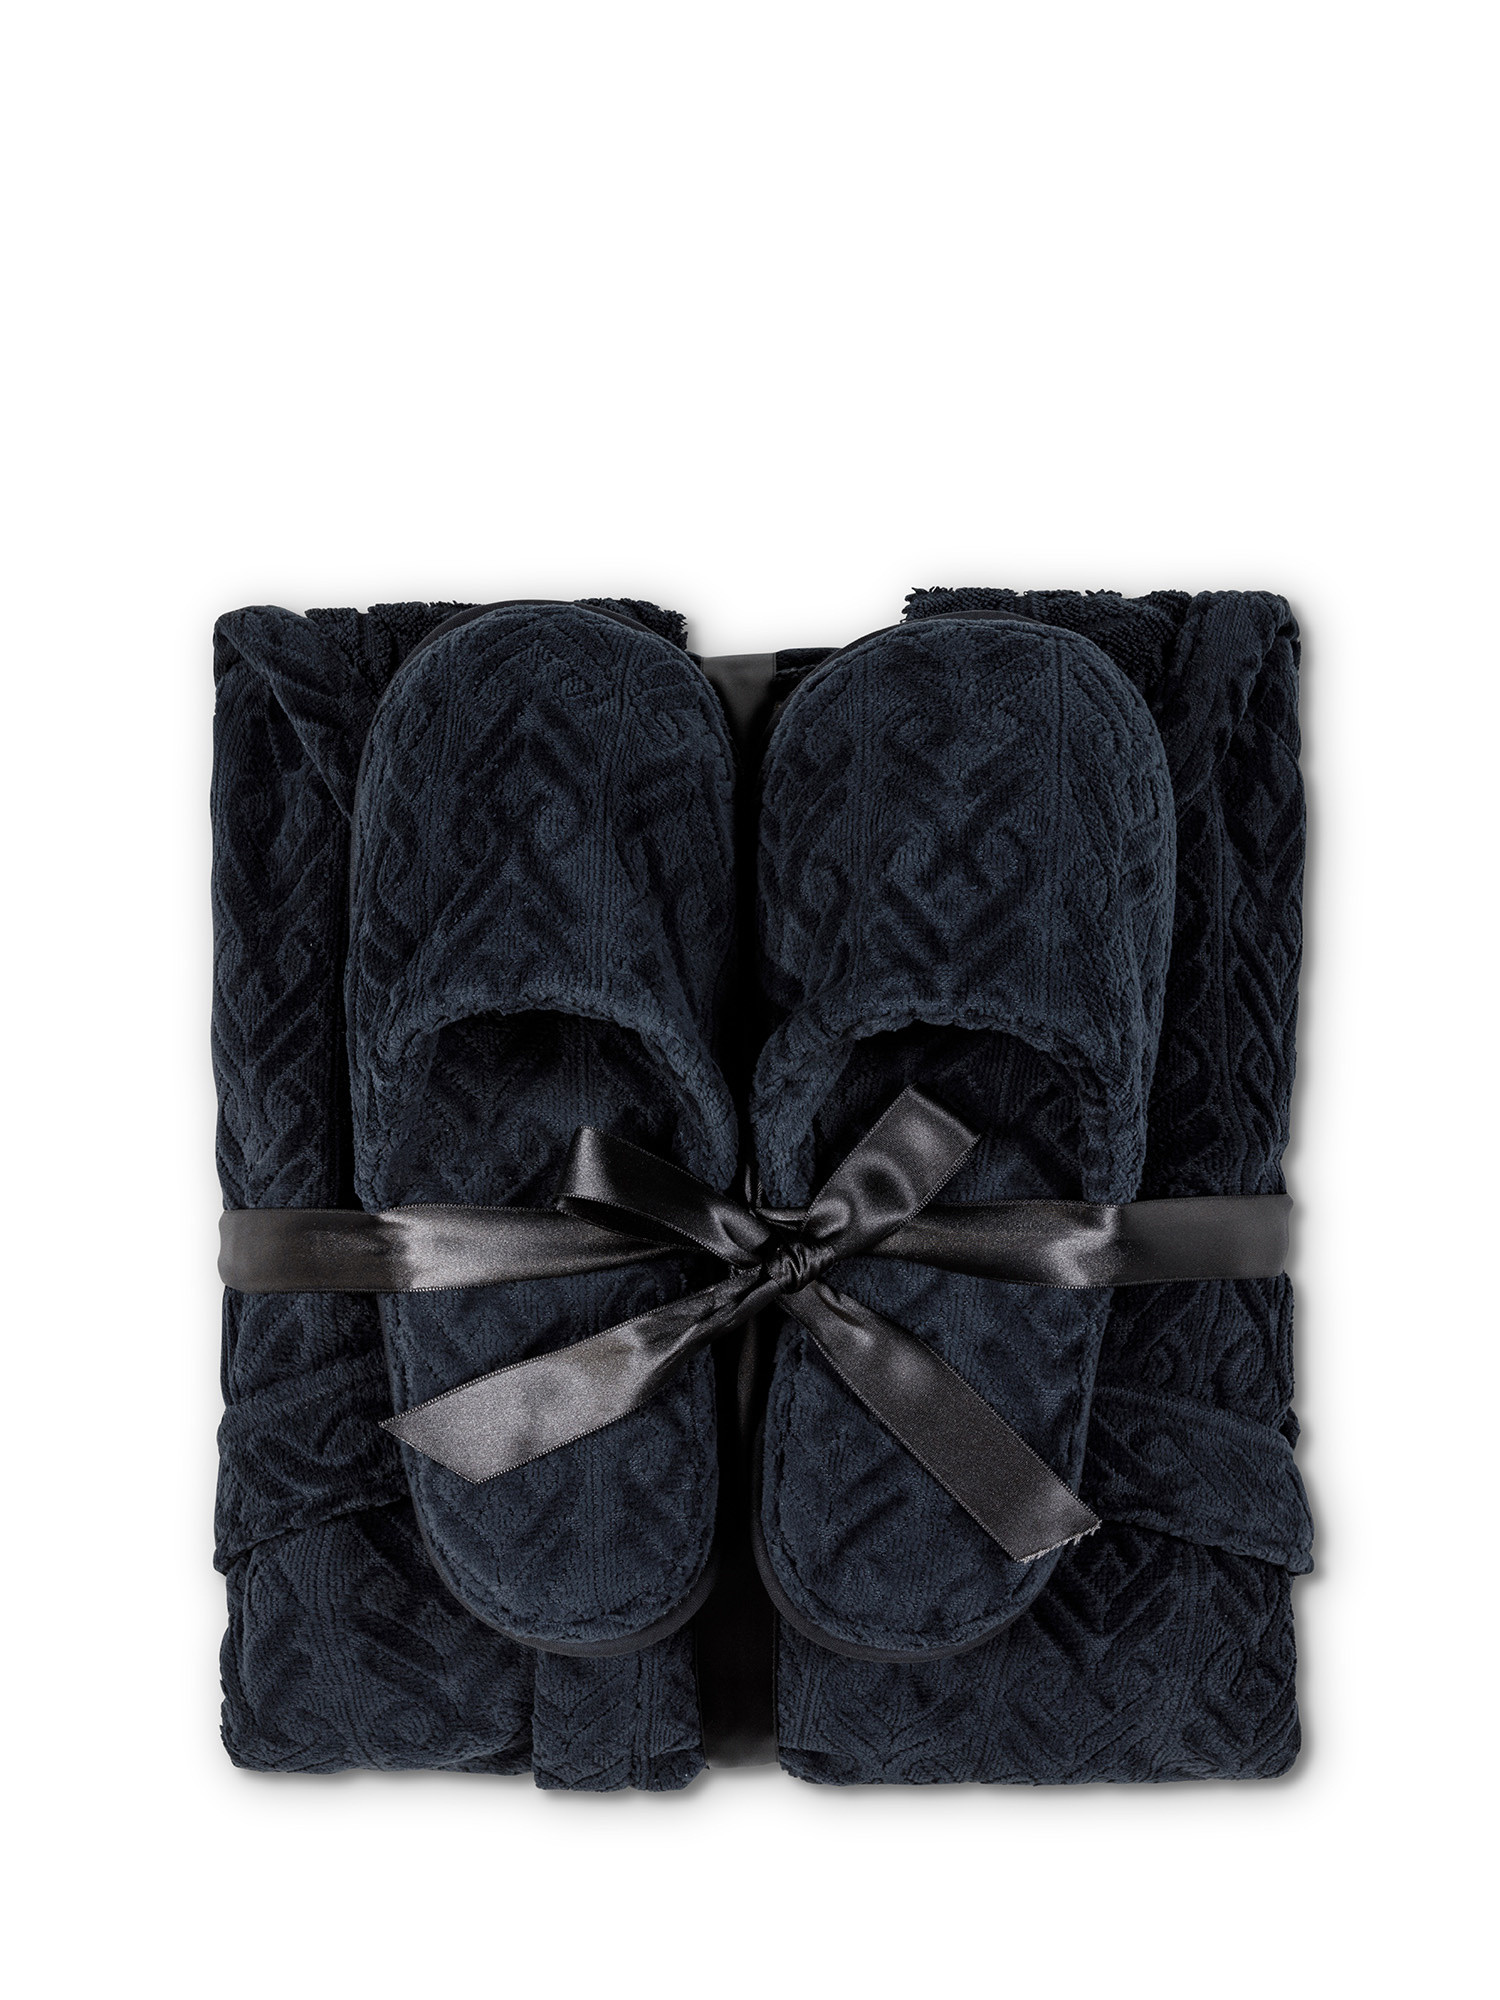 Men's bathrobe and slippers set in velor cotton terry with relief pattern, Grey, large image number 2